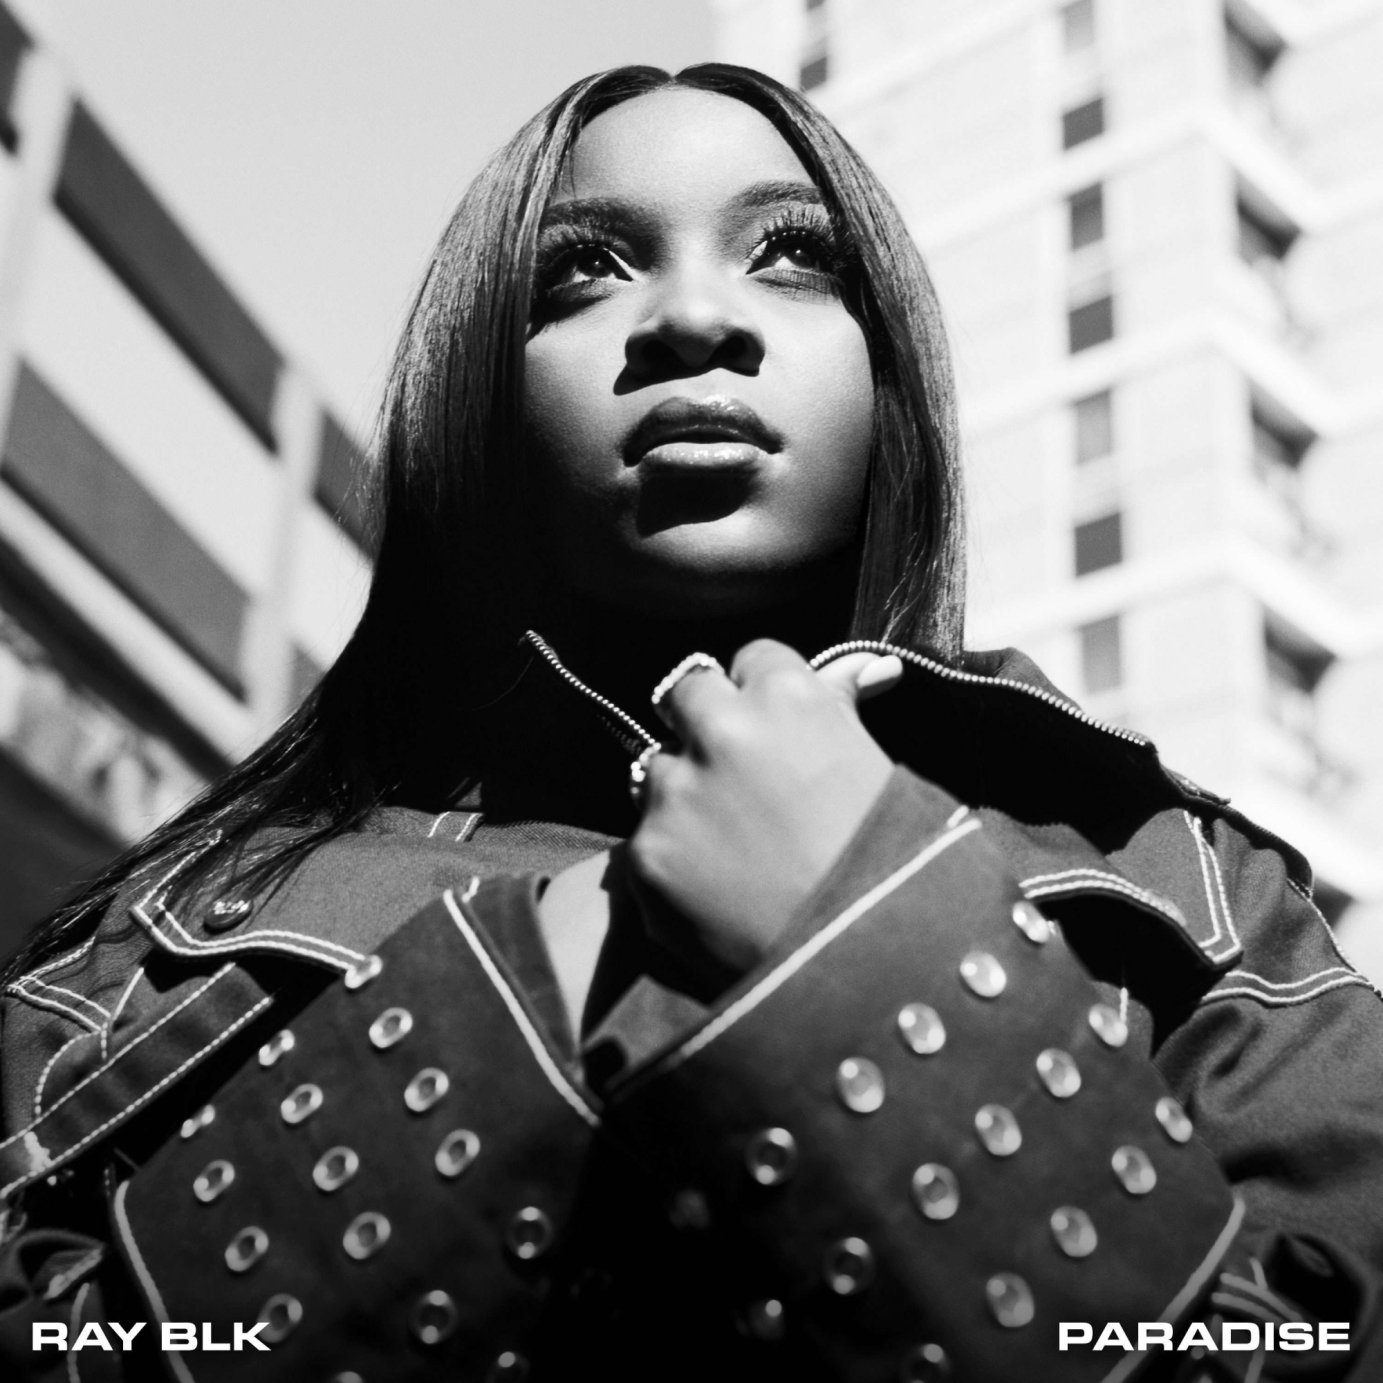 Graphic design for RAY BLK by ojcollins